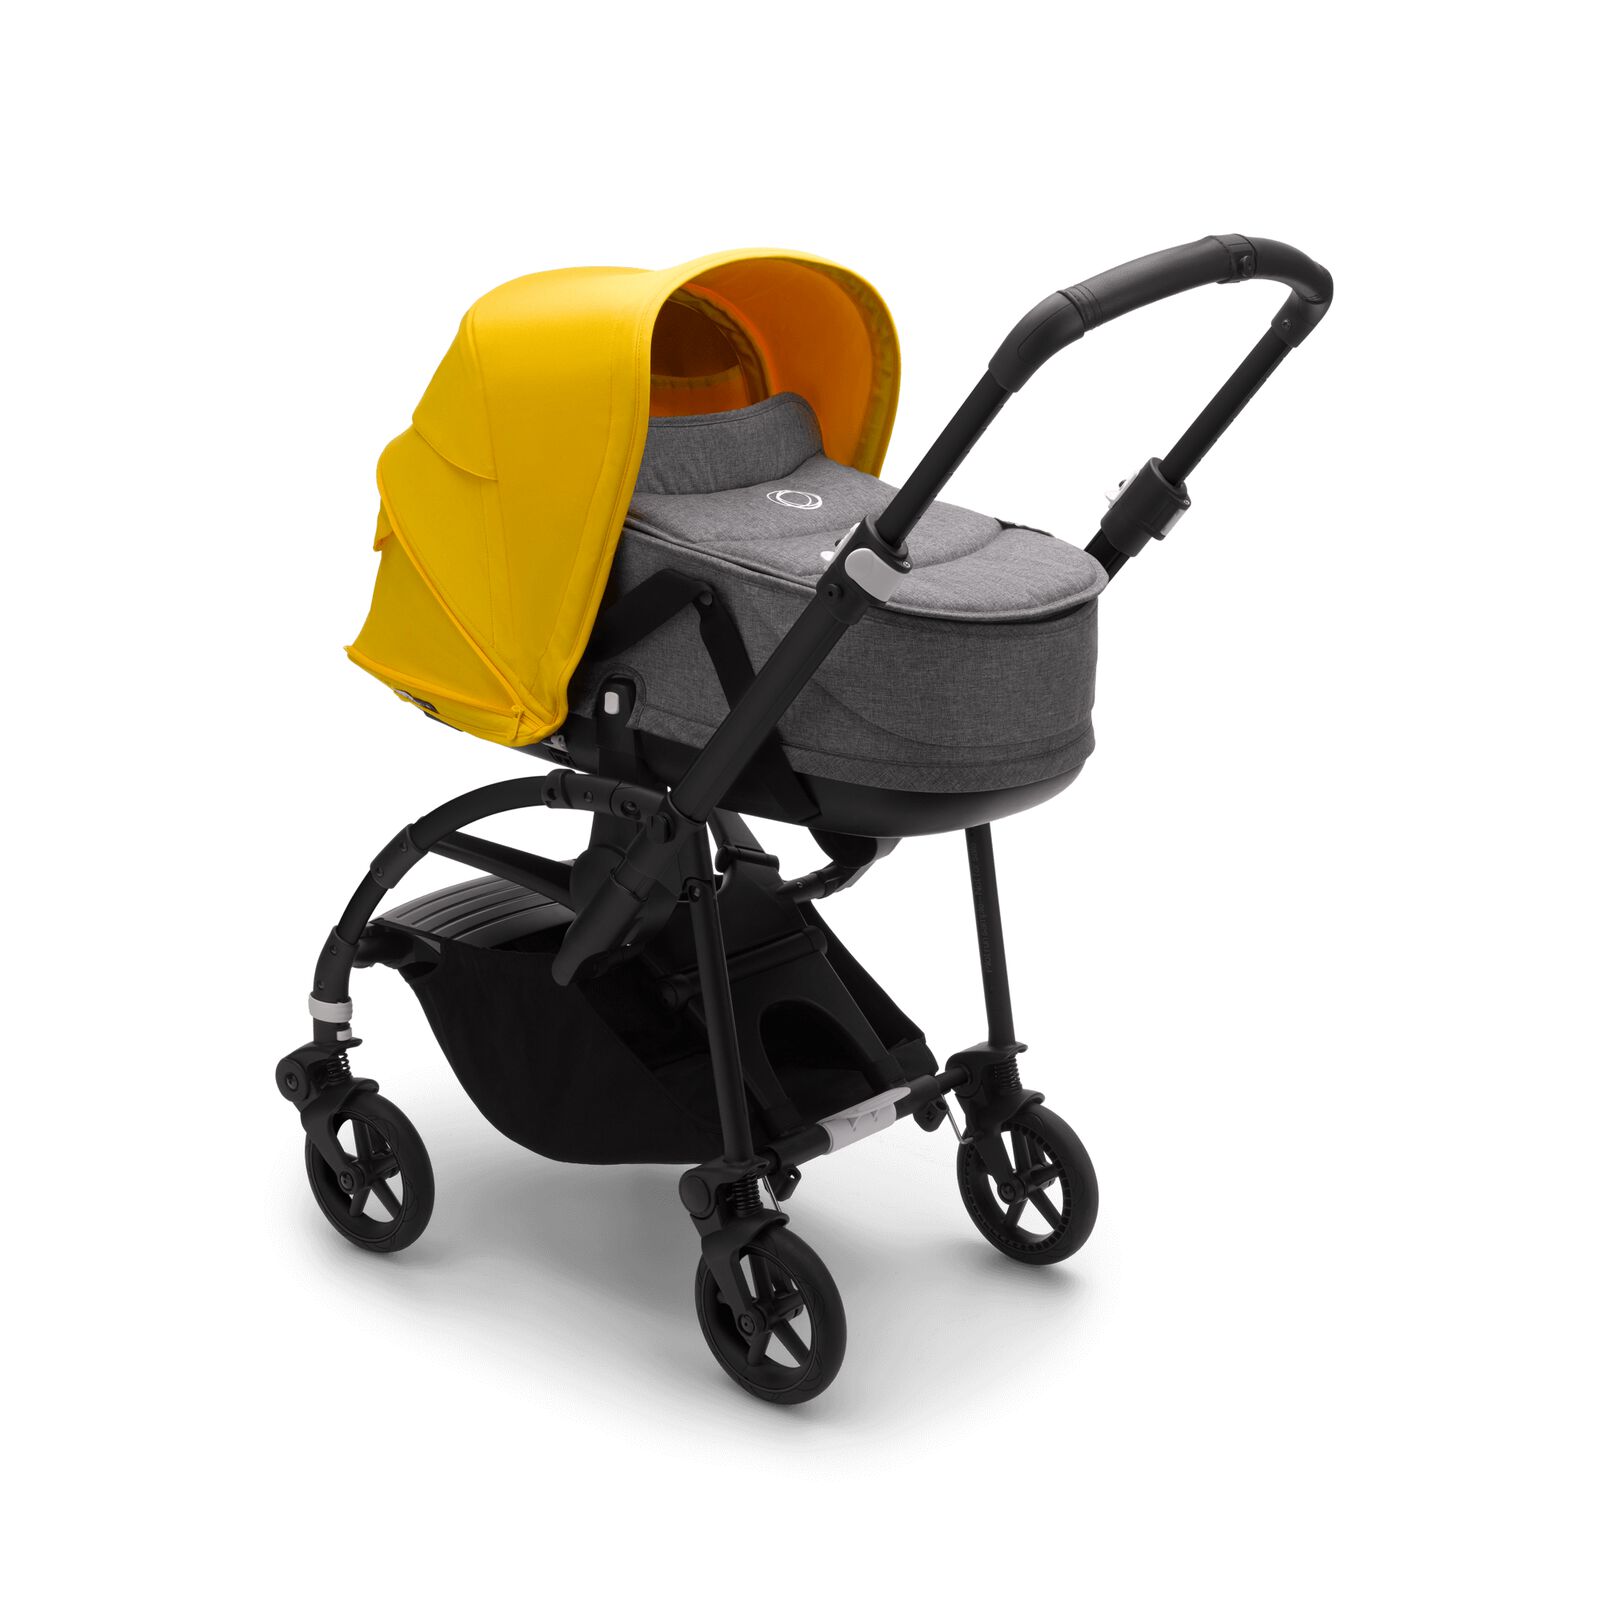 Bugaboo Bee 6 carrycot and seat pushchair